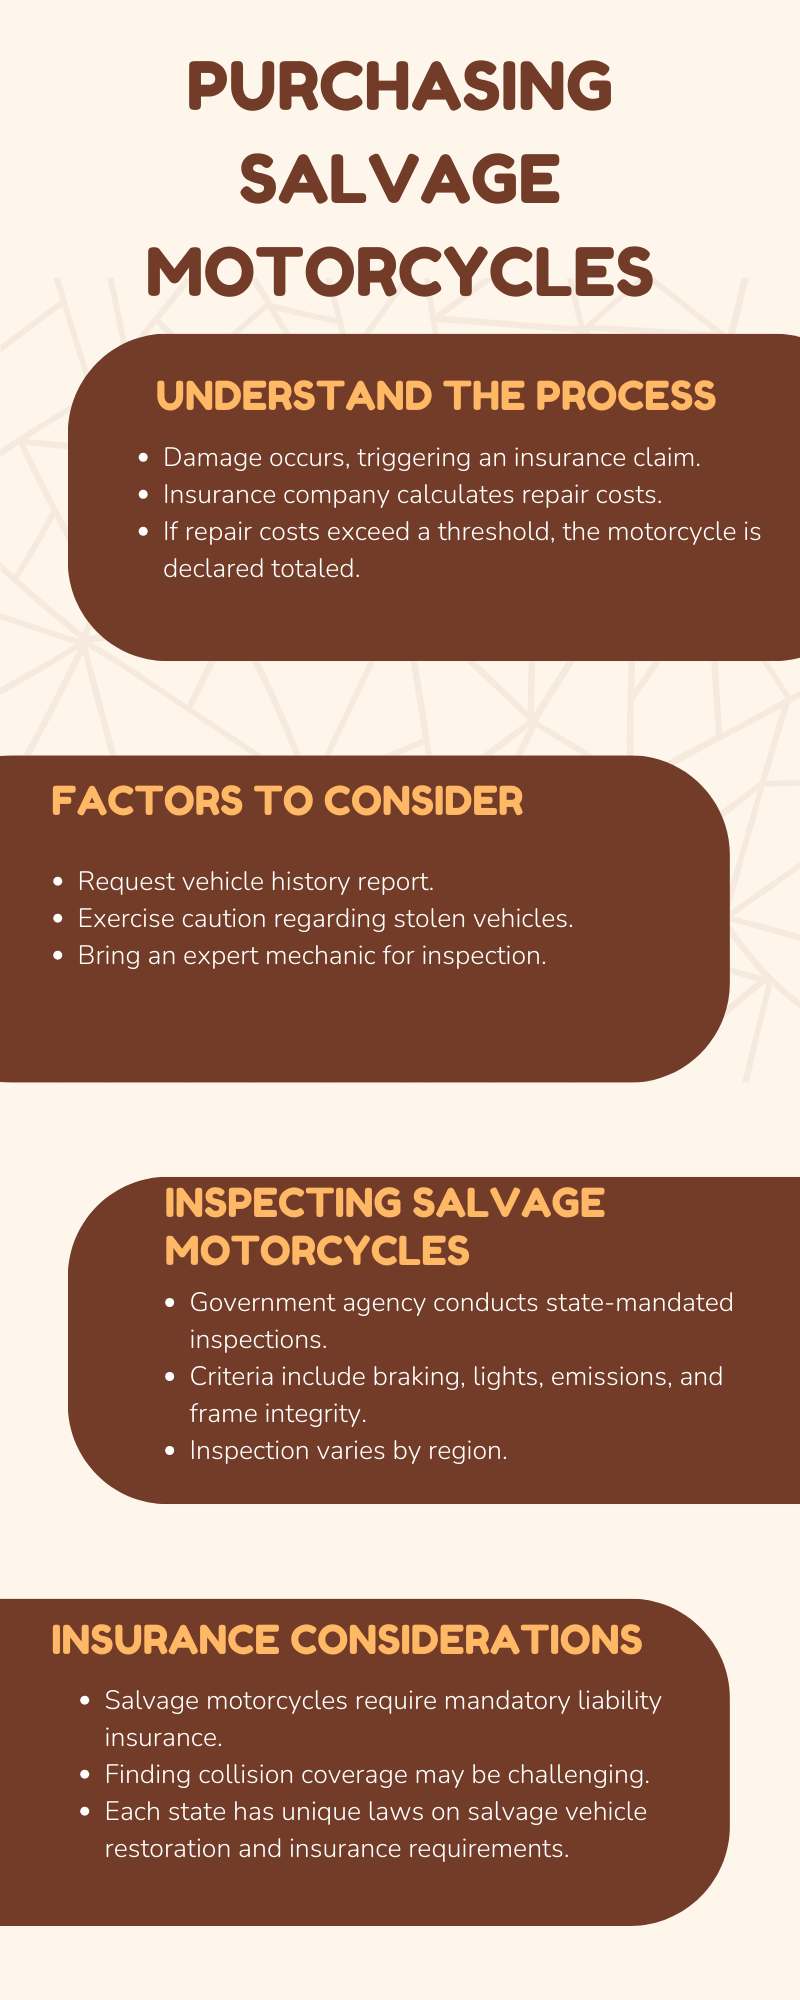 An infographic illustration of Purchasing Salvage Motorcycles